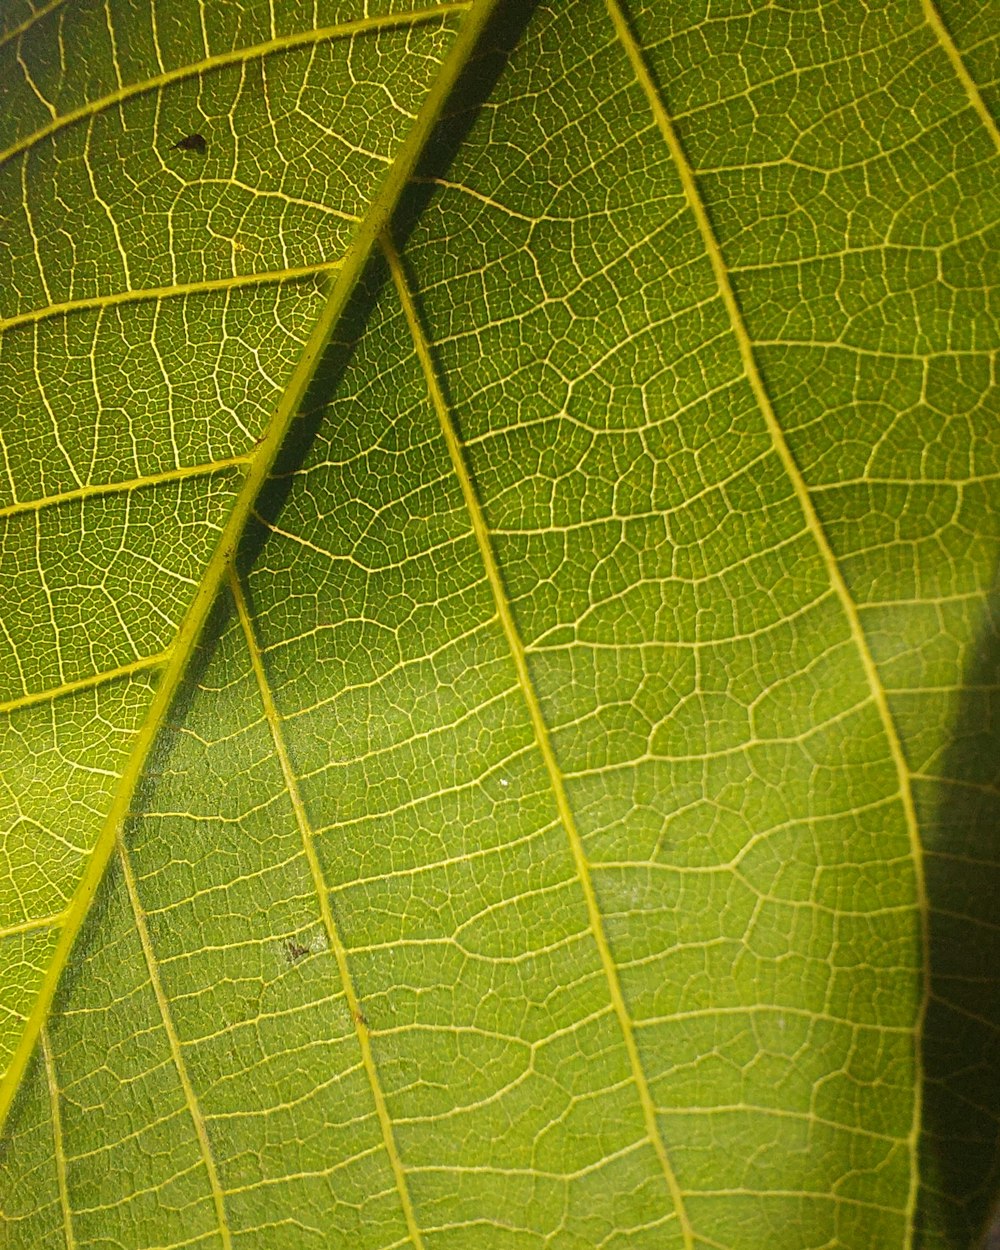 a close up view of a green leaf